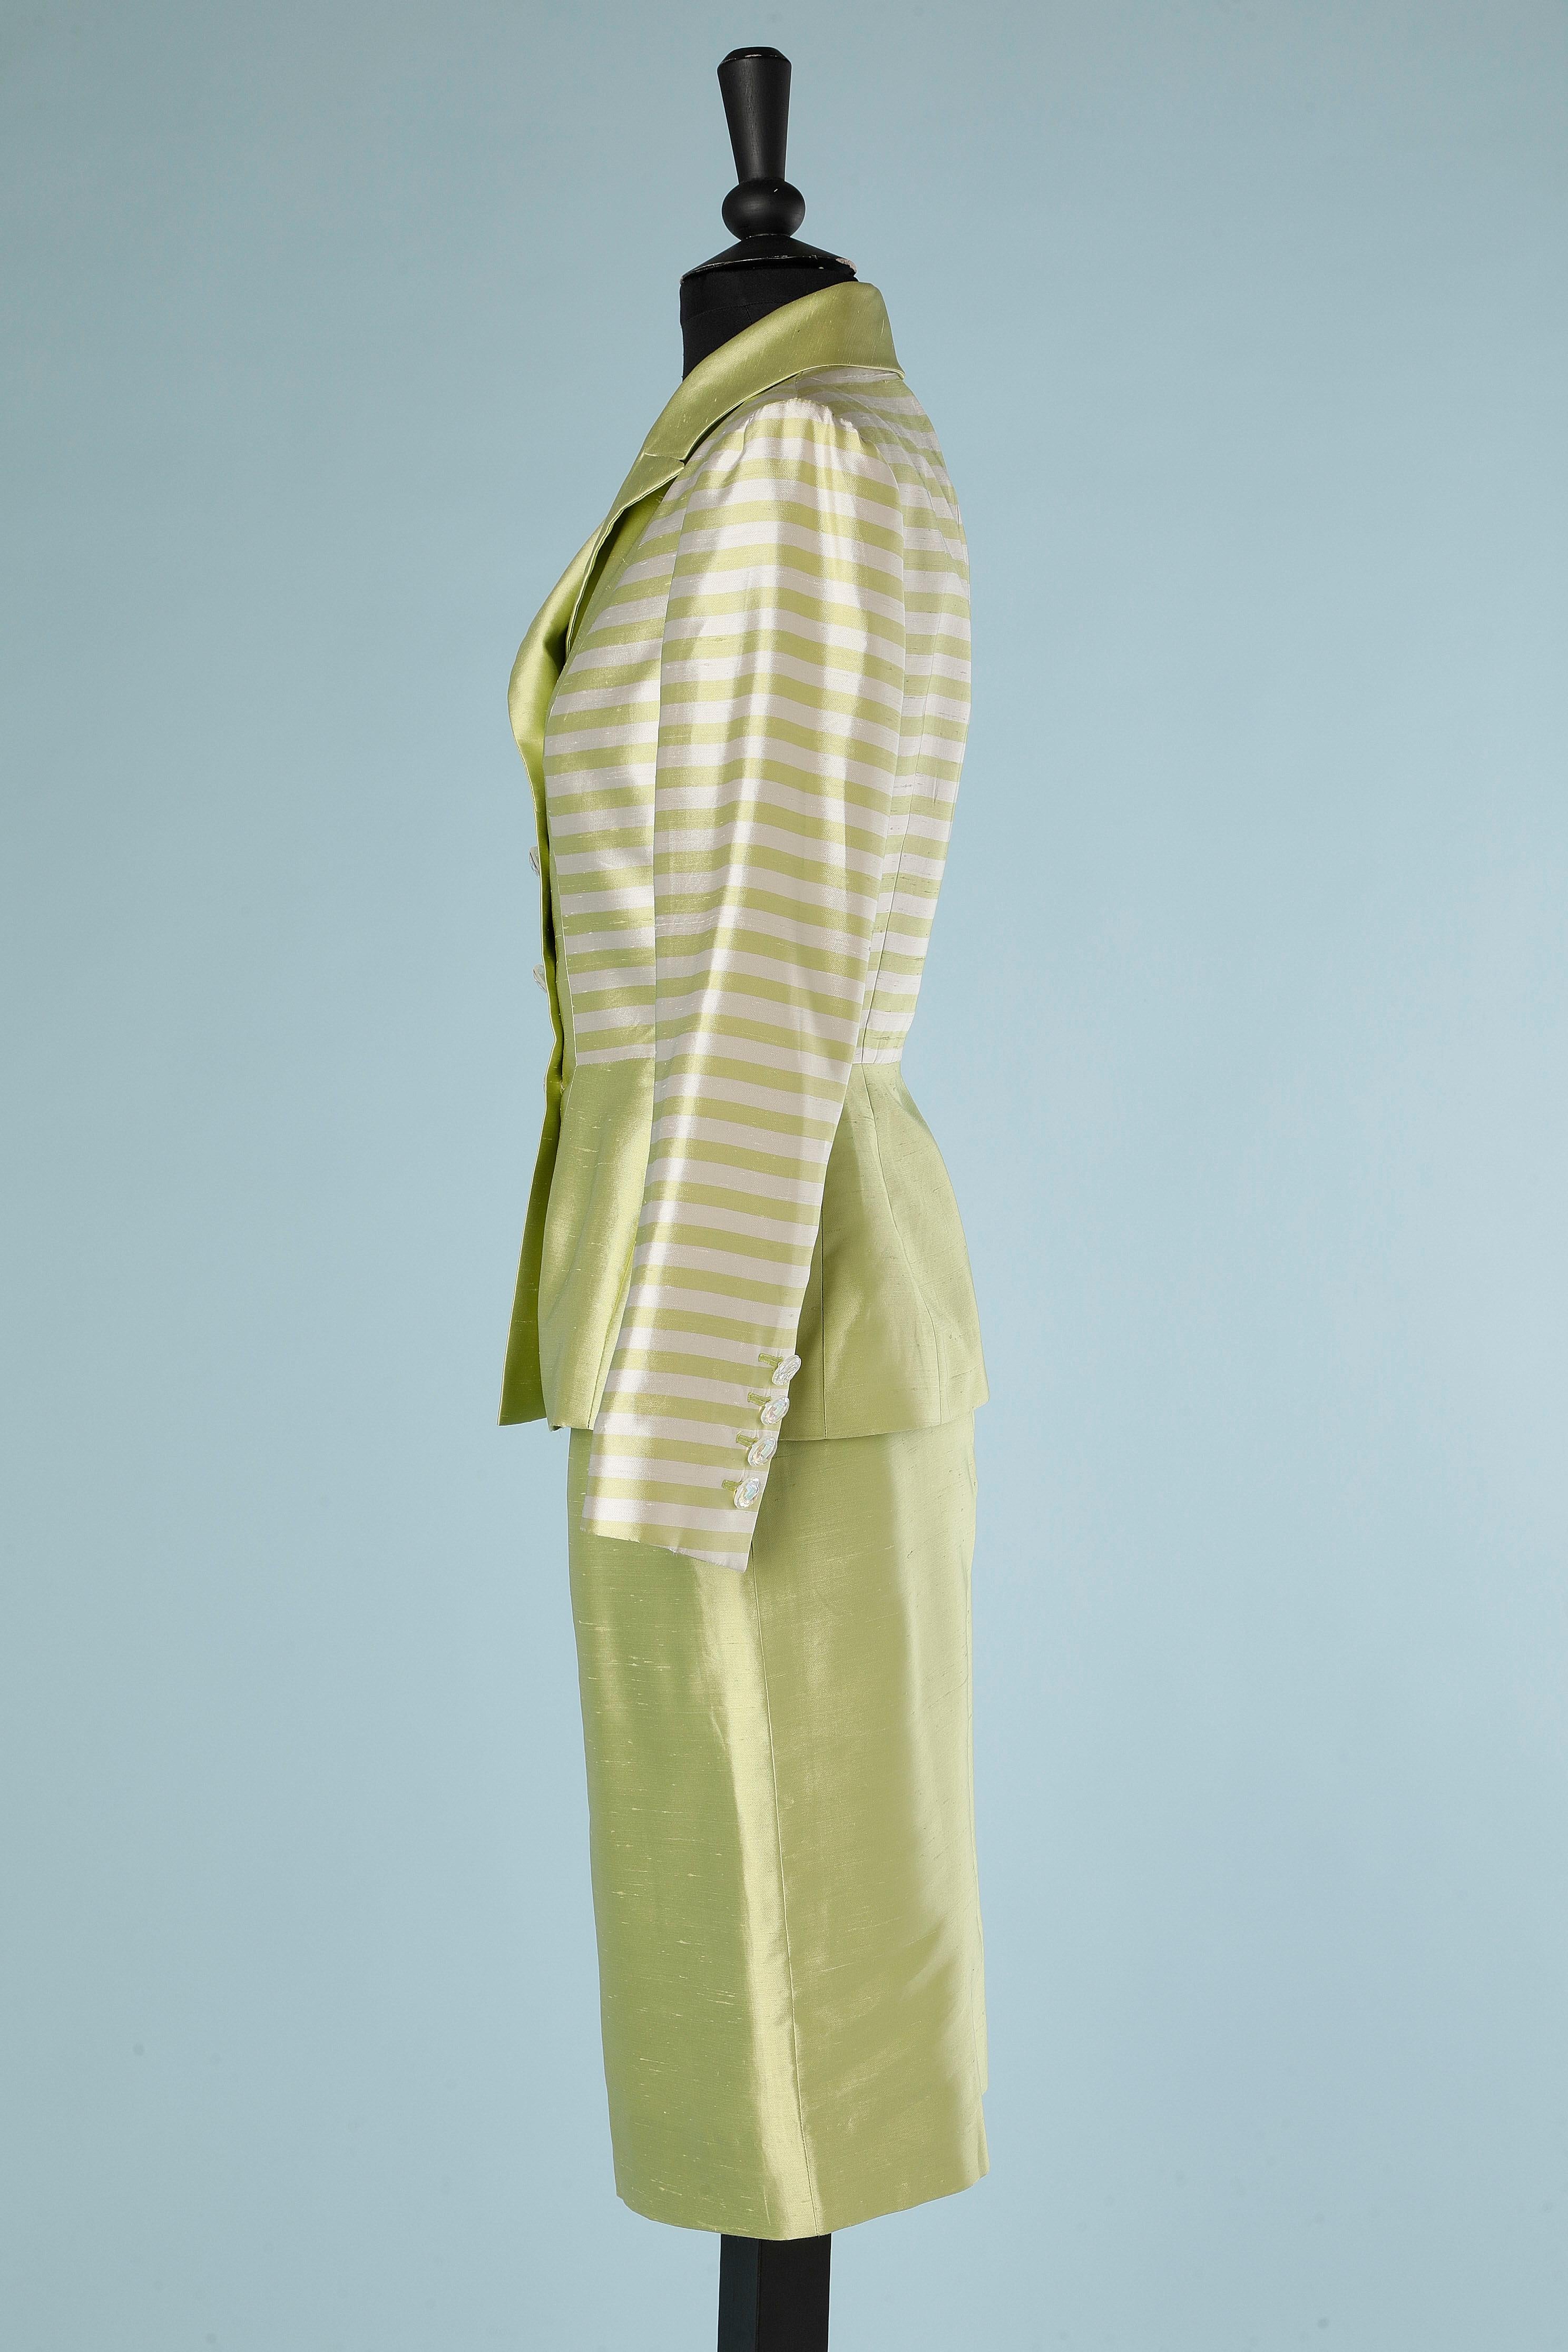 Green and white wild silk skirt-suit Jacques Fath for Neiman Marcus  For Sale 1